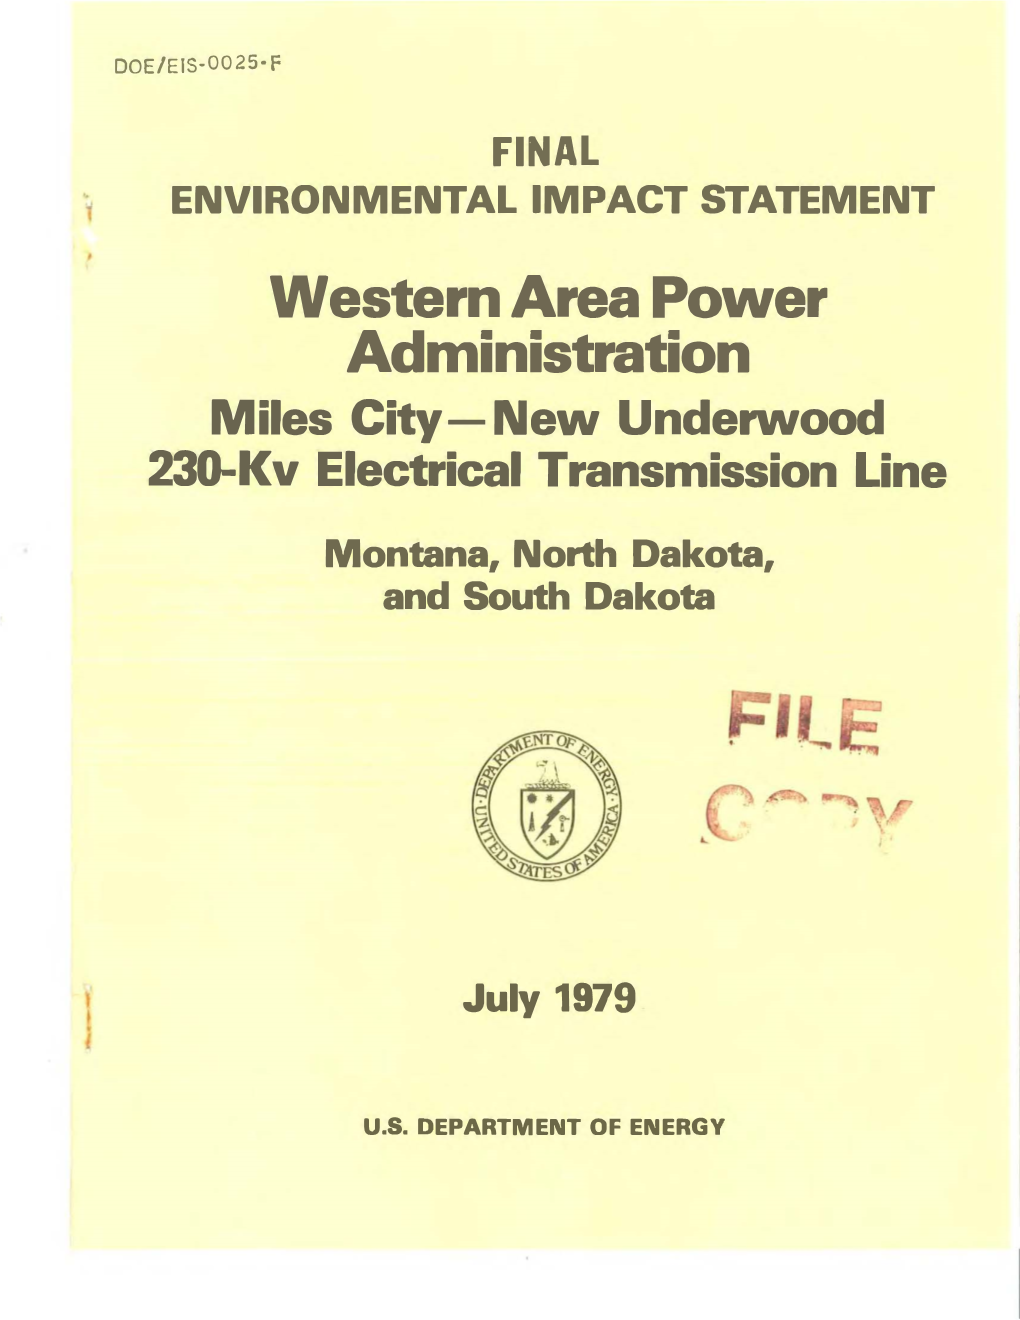 Western Area Power Administration Miles City-New Underwood 230-Kv Electrical Transmission Line